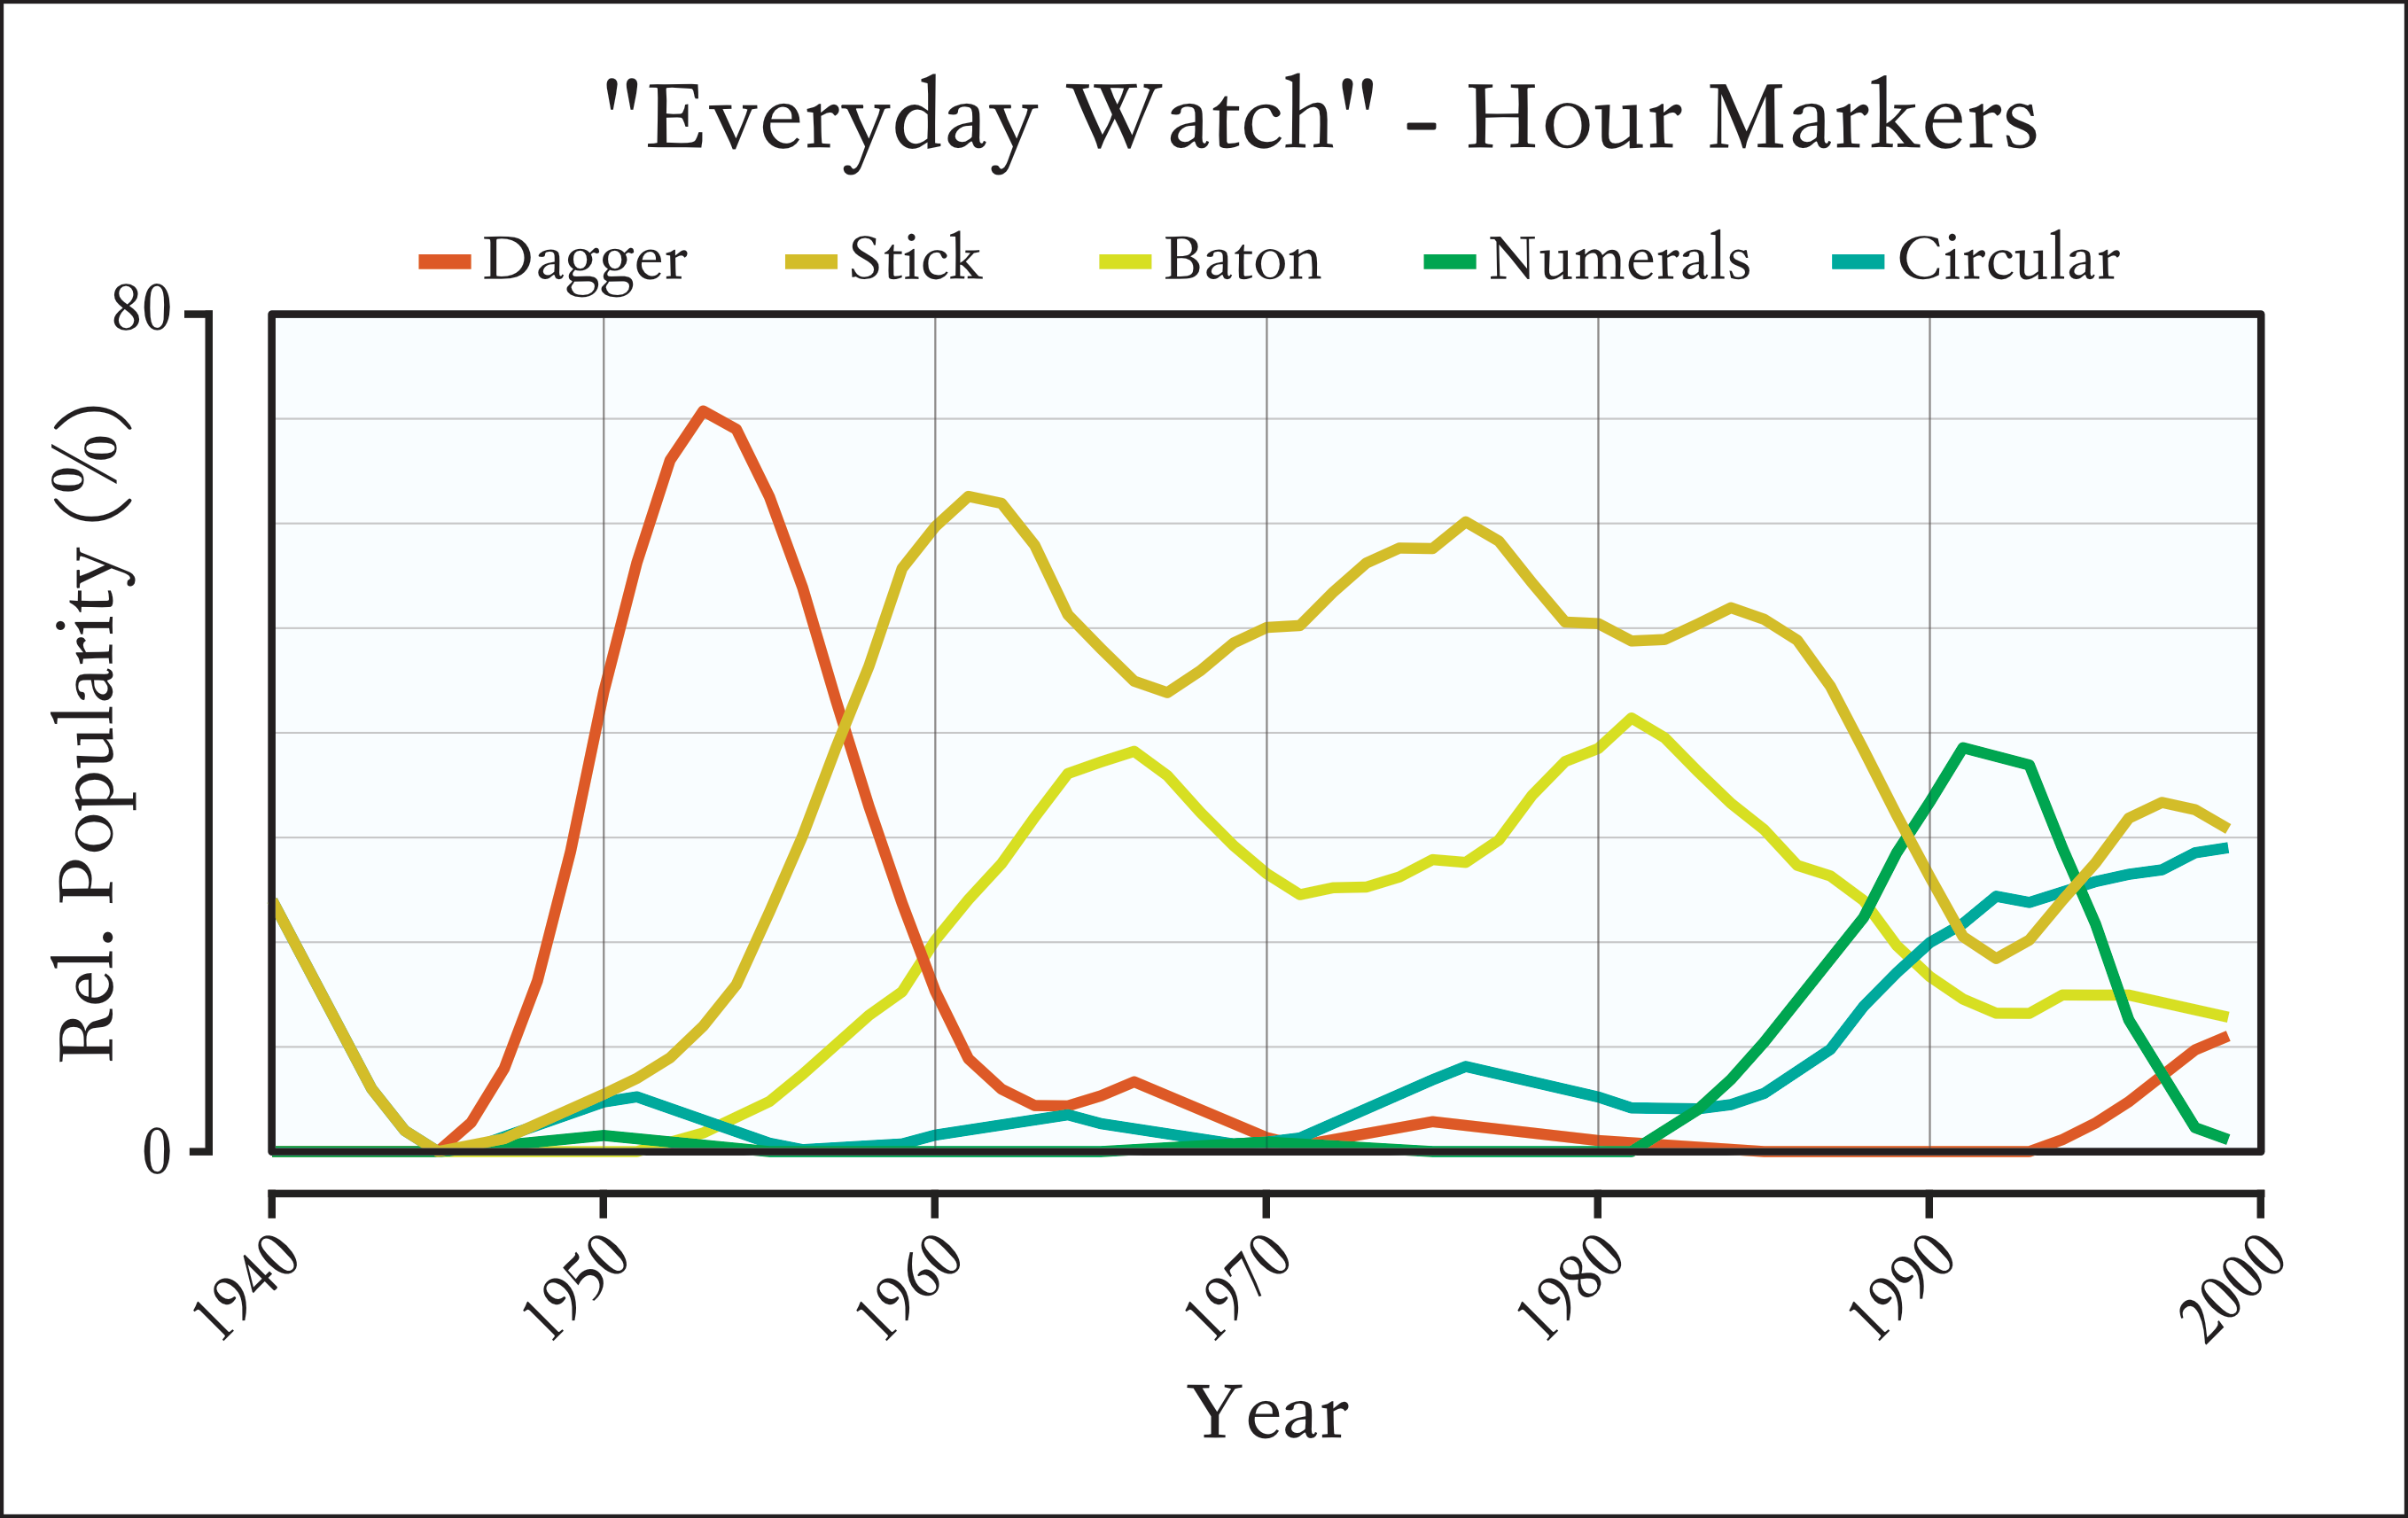 Historical Distribution of Hour Markers on Dress Casual Watches between 1940 - 2000